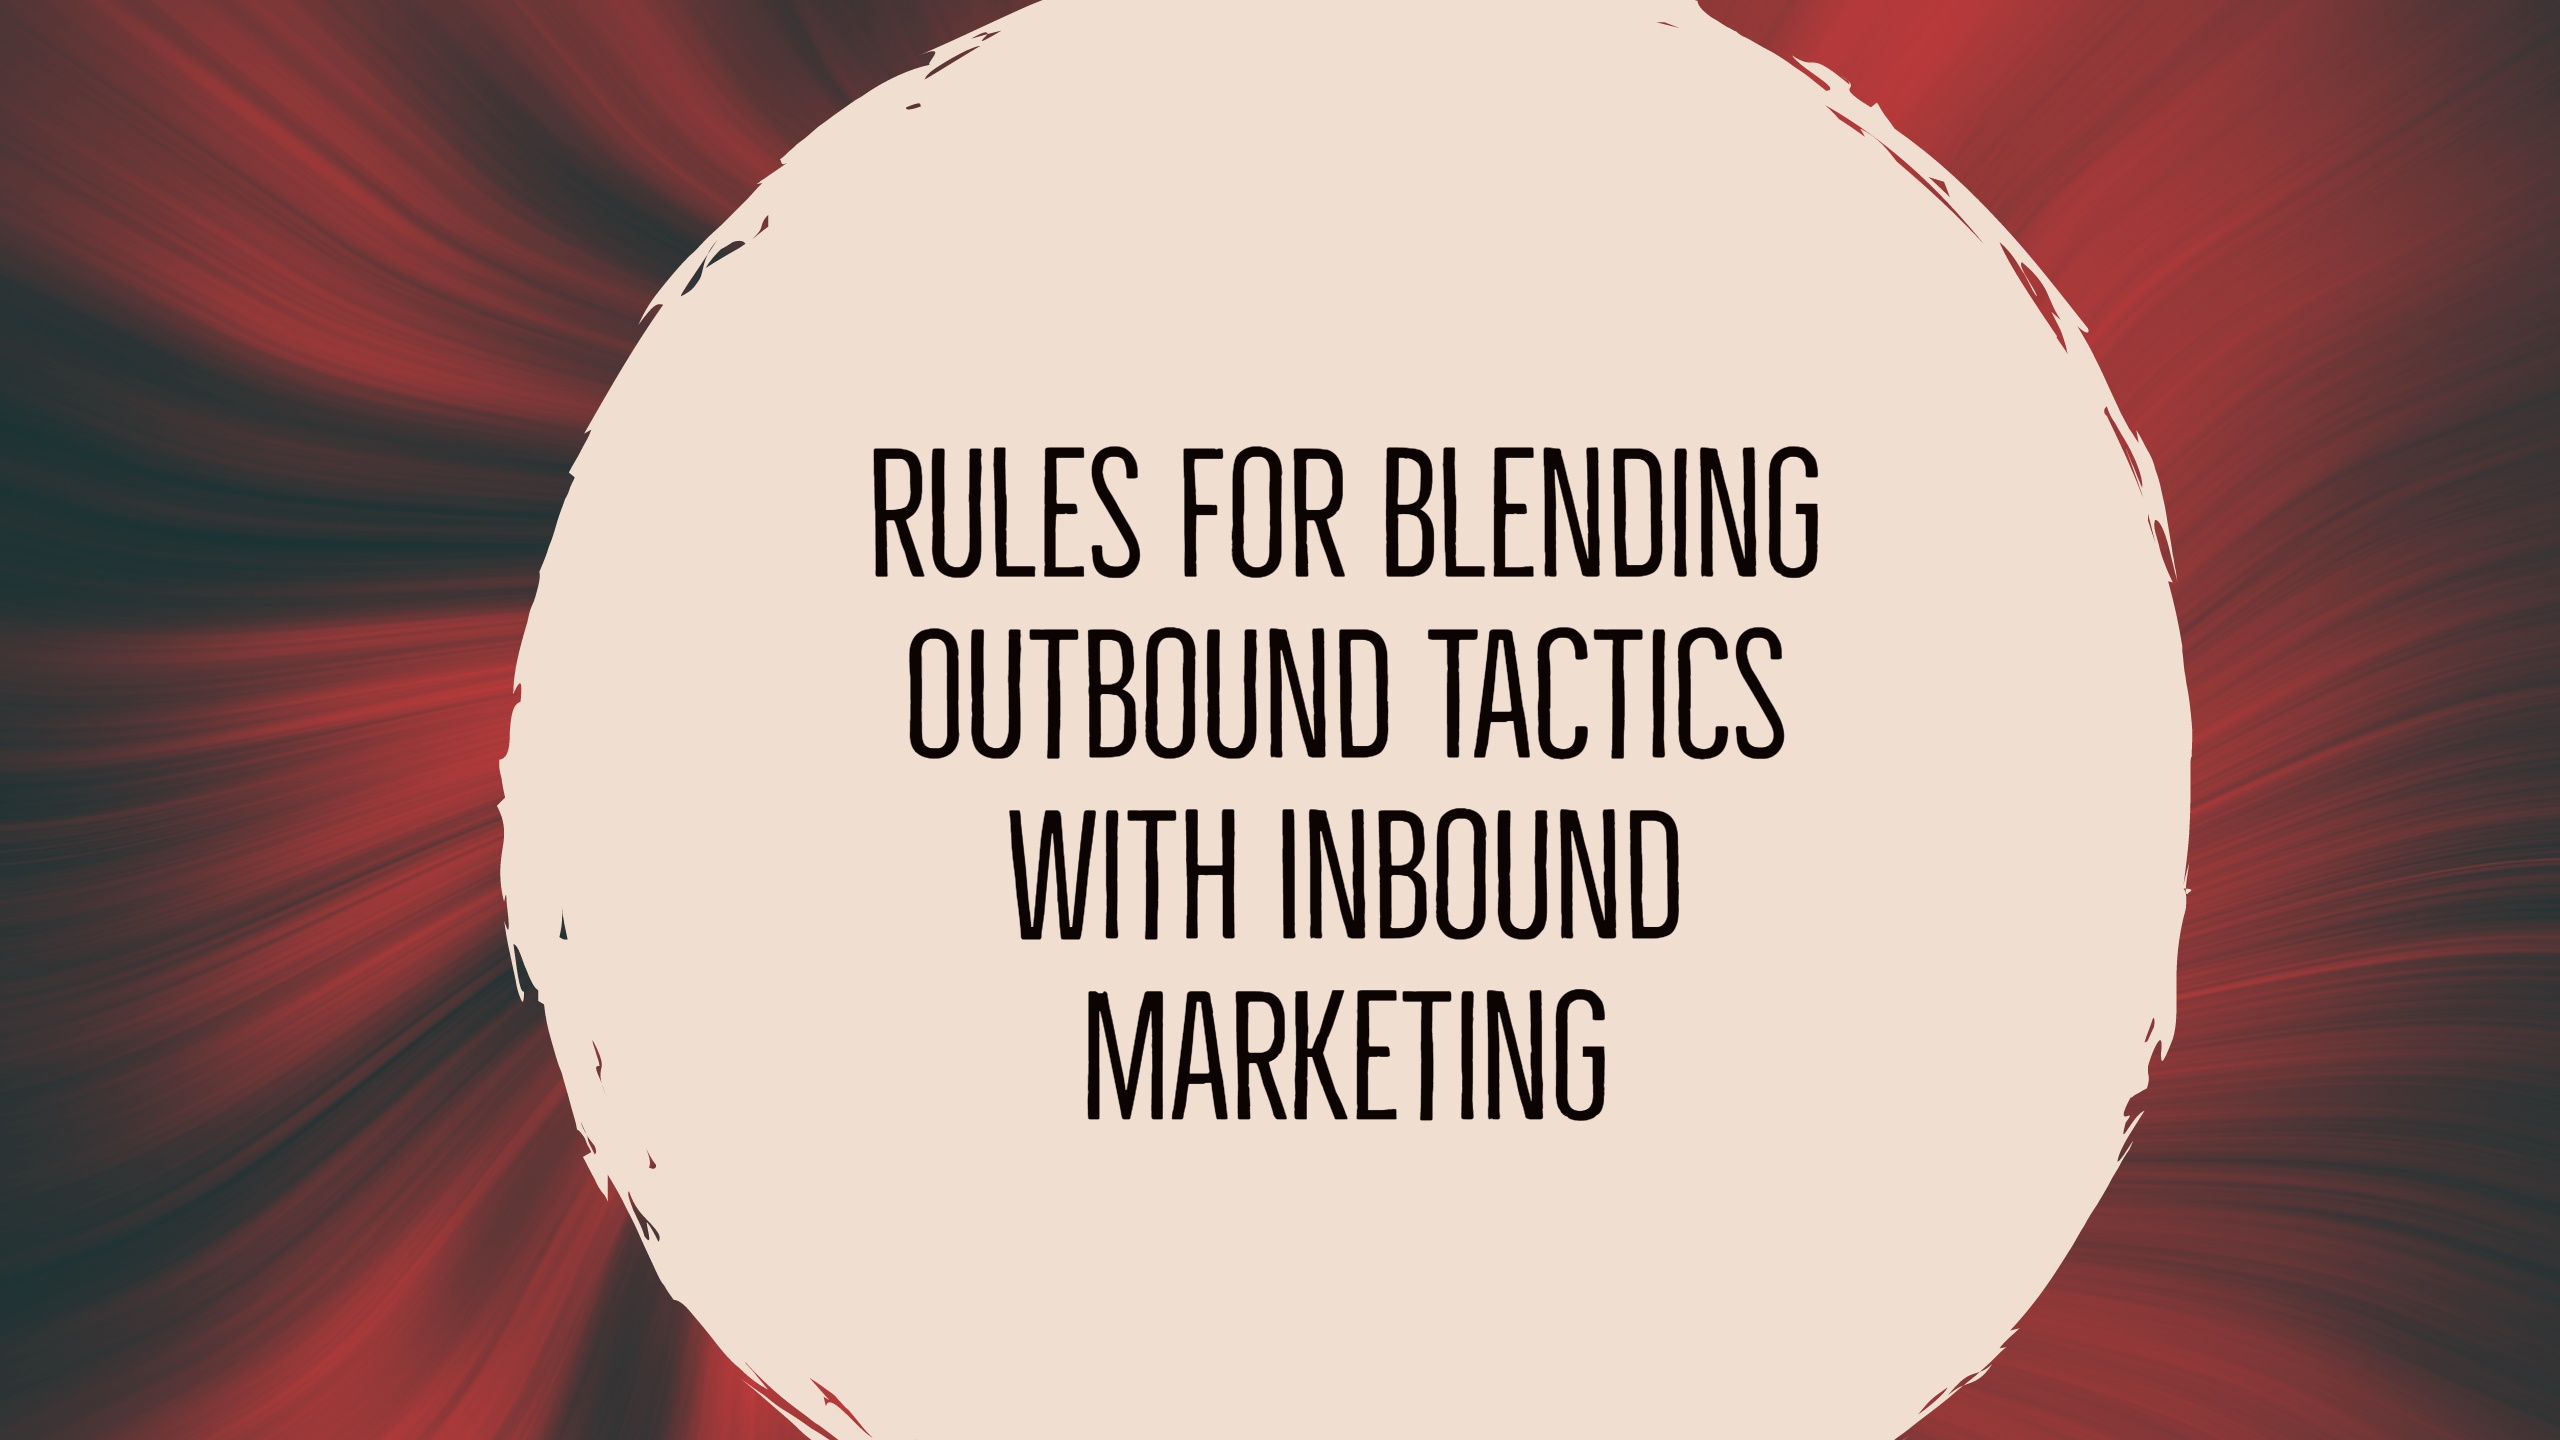 How to Blend Outbound Tactics With Inbound Marketing